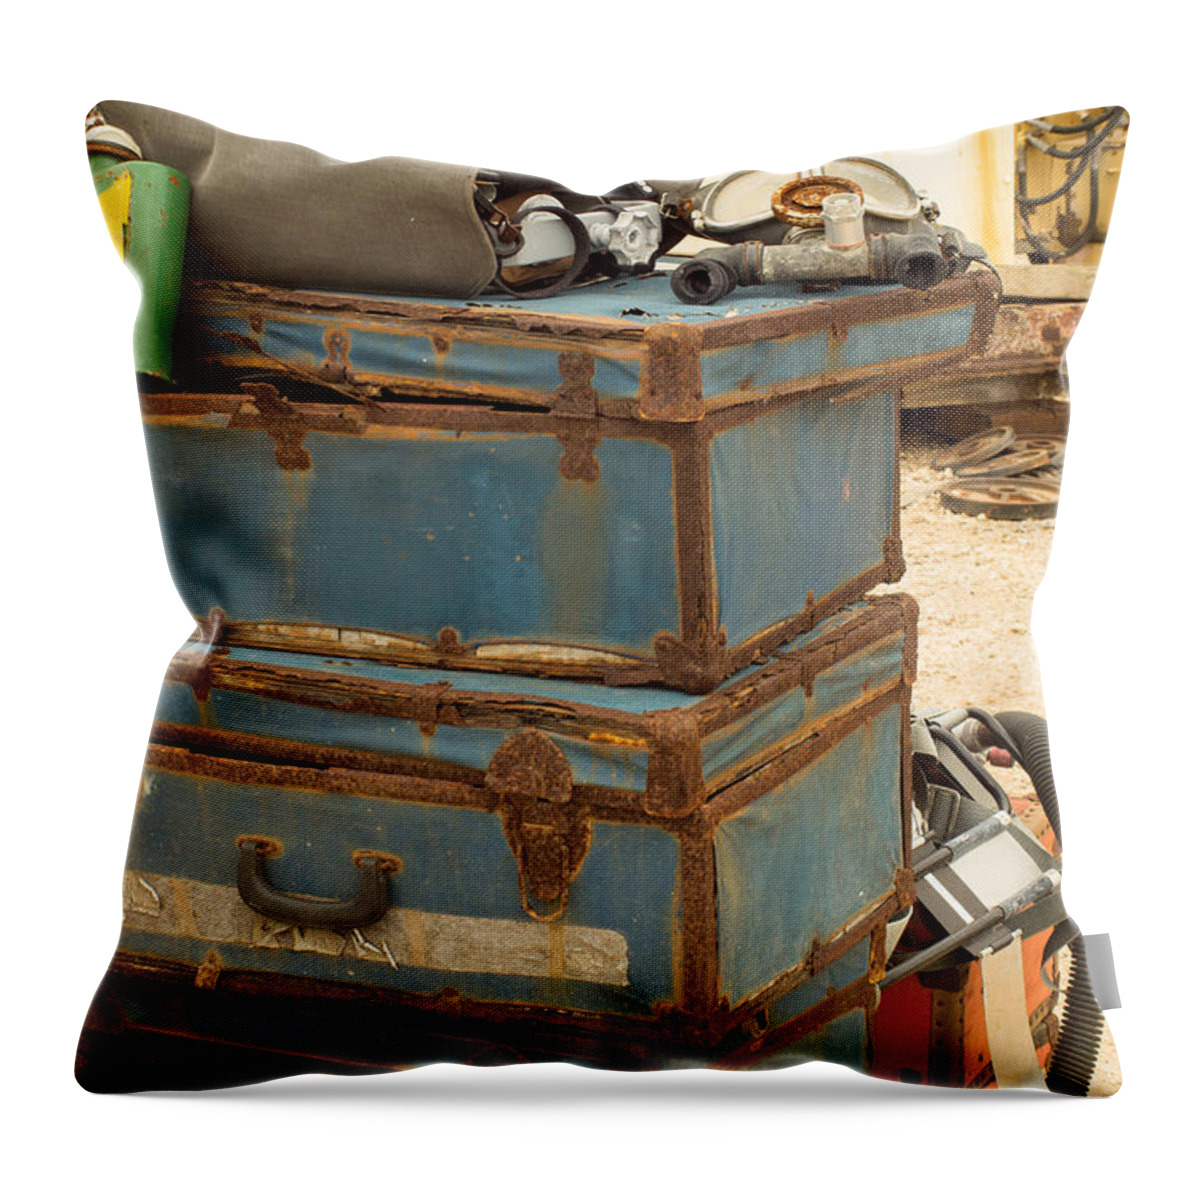 Breathing Throw Pillow featuring the photograph Breathing Apparatus Equipment by Imagery by Charly